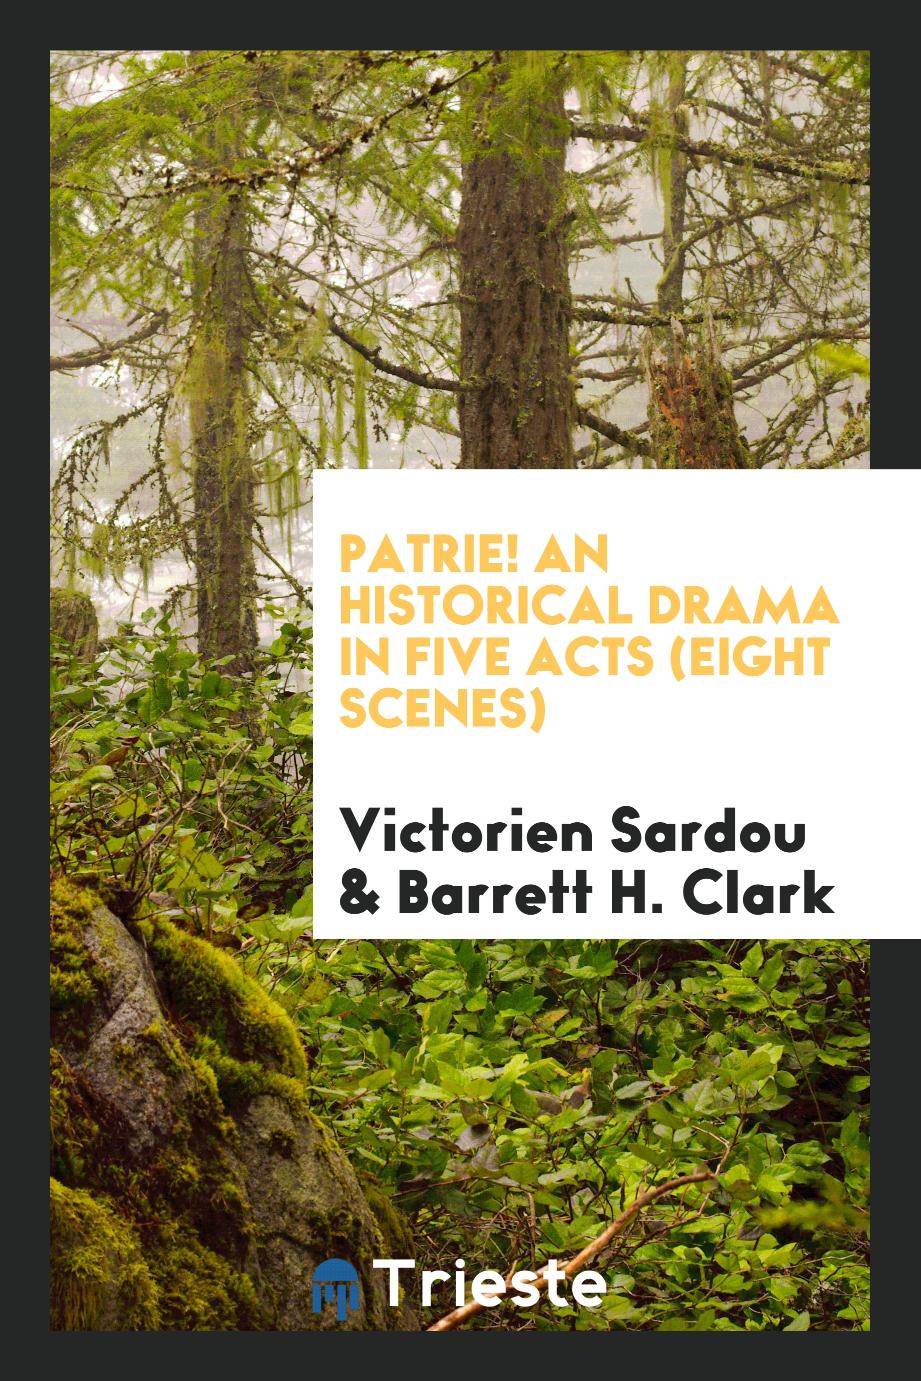 Patrie! An historical drama in five acts (eight scenes)